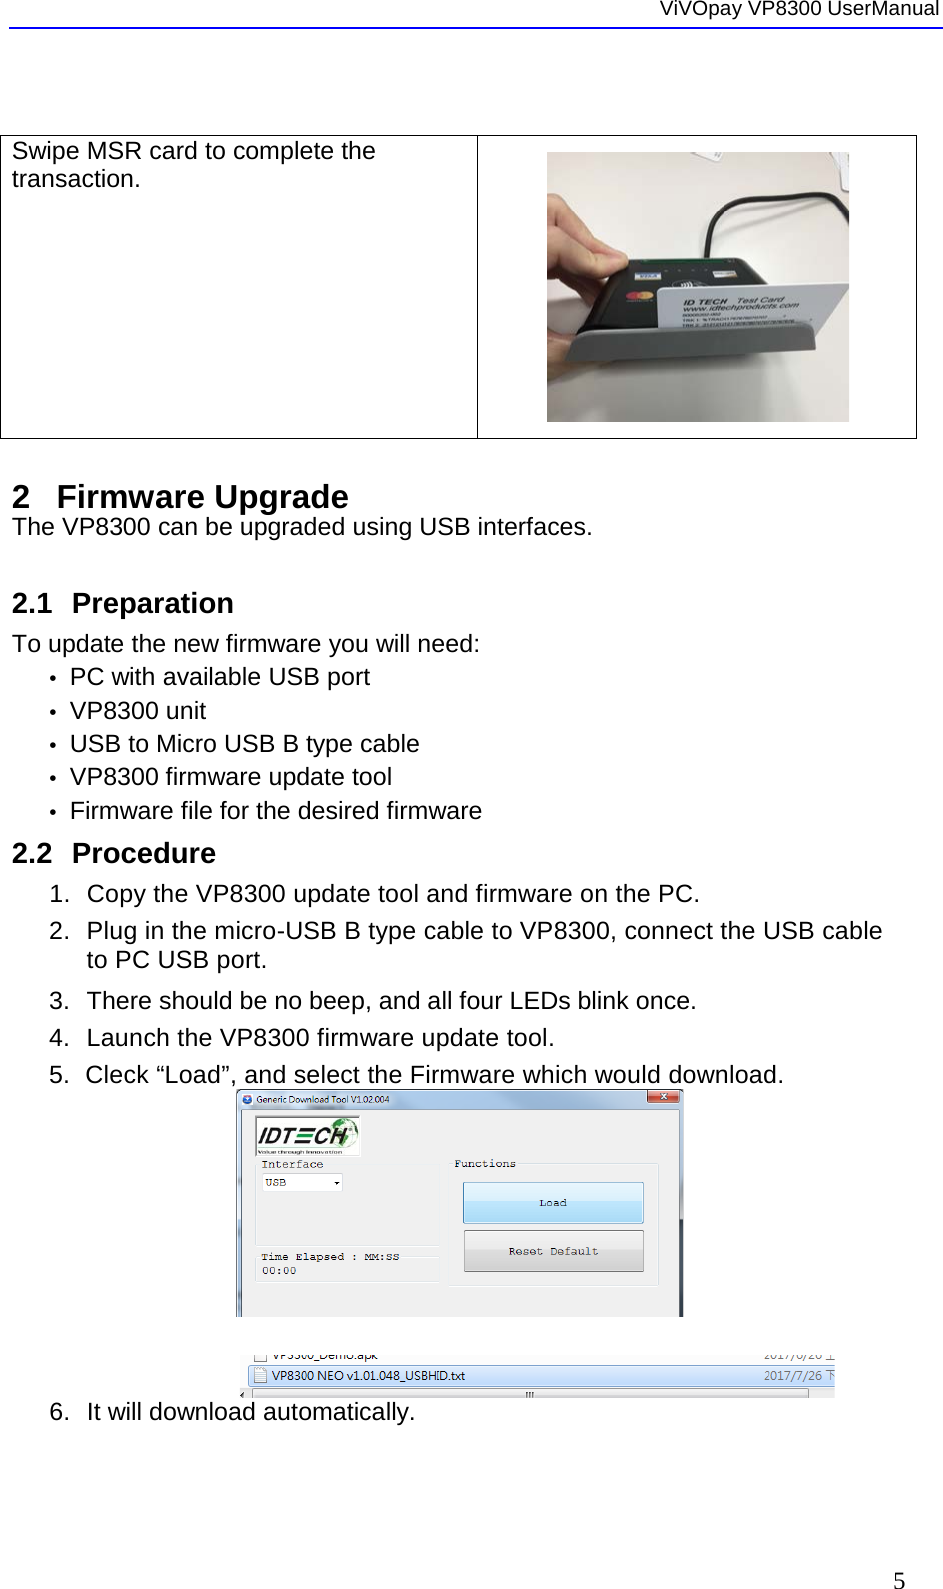  ViVOpay VP8300 UserManual     5  Swipe MSR card to complete the transaction.   2  Firmware Upgrade The VP8300 can be upgraded using USB interfaces.   2.1 Preparation To update the new firmware you will need: •  PC with available USB port •  VP8300 unit  •  USB to Micro USB B type cable •  VP8300 firmware update tool •  Firmware file for the desired firmware 2.2 Procedure 1. Copy the VP8300 update tool and firmware on the PC. 2.  Plug in the micro-USB B type cable to VP8300, connect the USB cable to PC USB port. 3. There should be no beep, and all four LEDs blink once. 4. Launch the VP8300 firmware update tool. 5. Cleck “Load”, and select the Firmware which would download.                6. It will download automatically.  